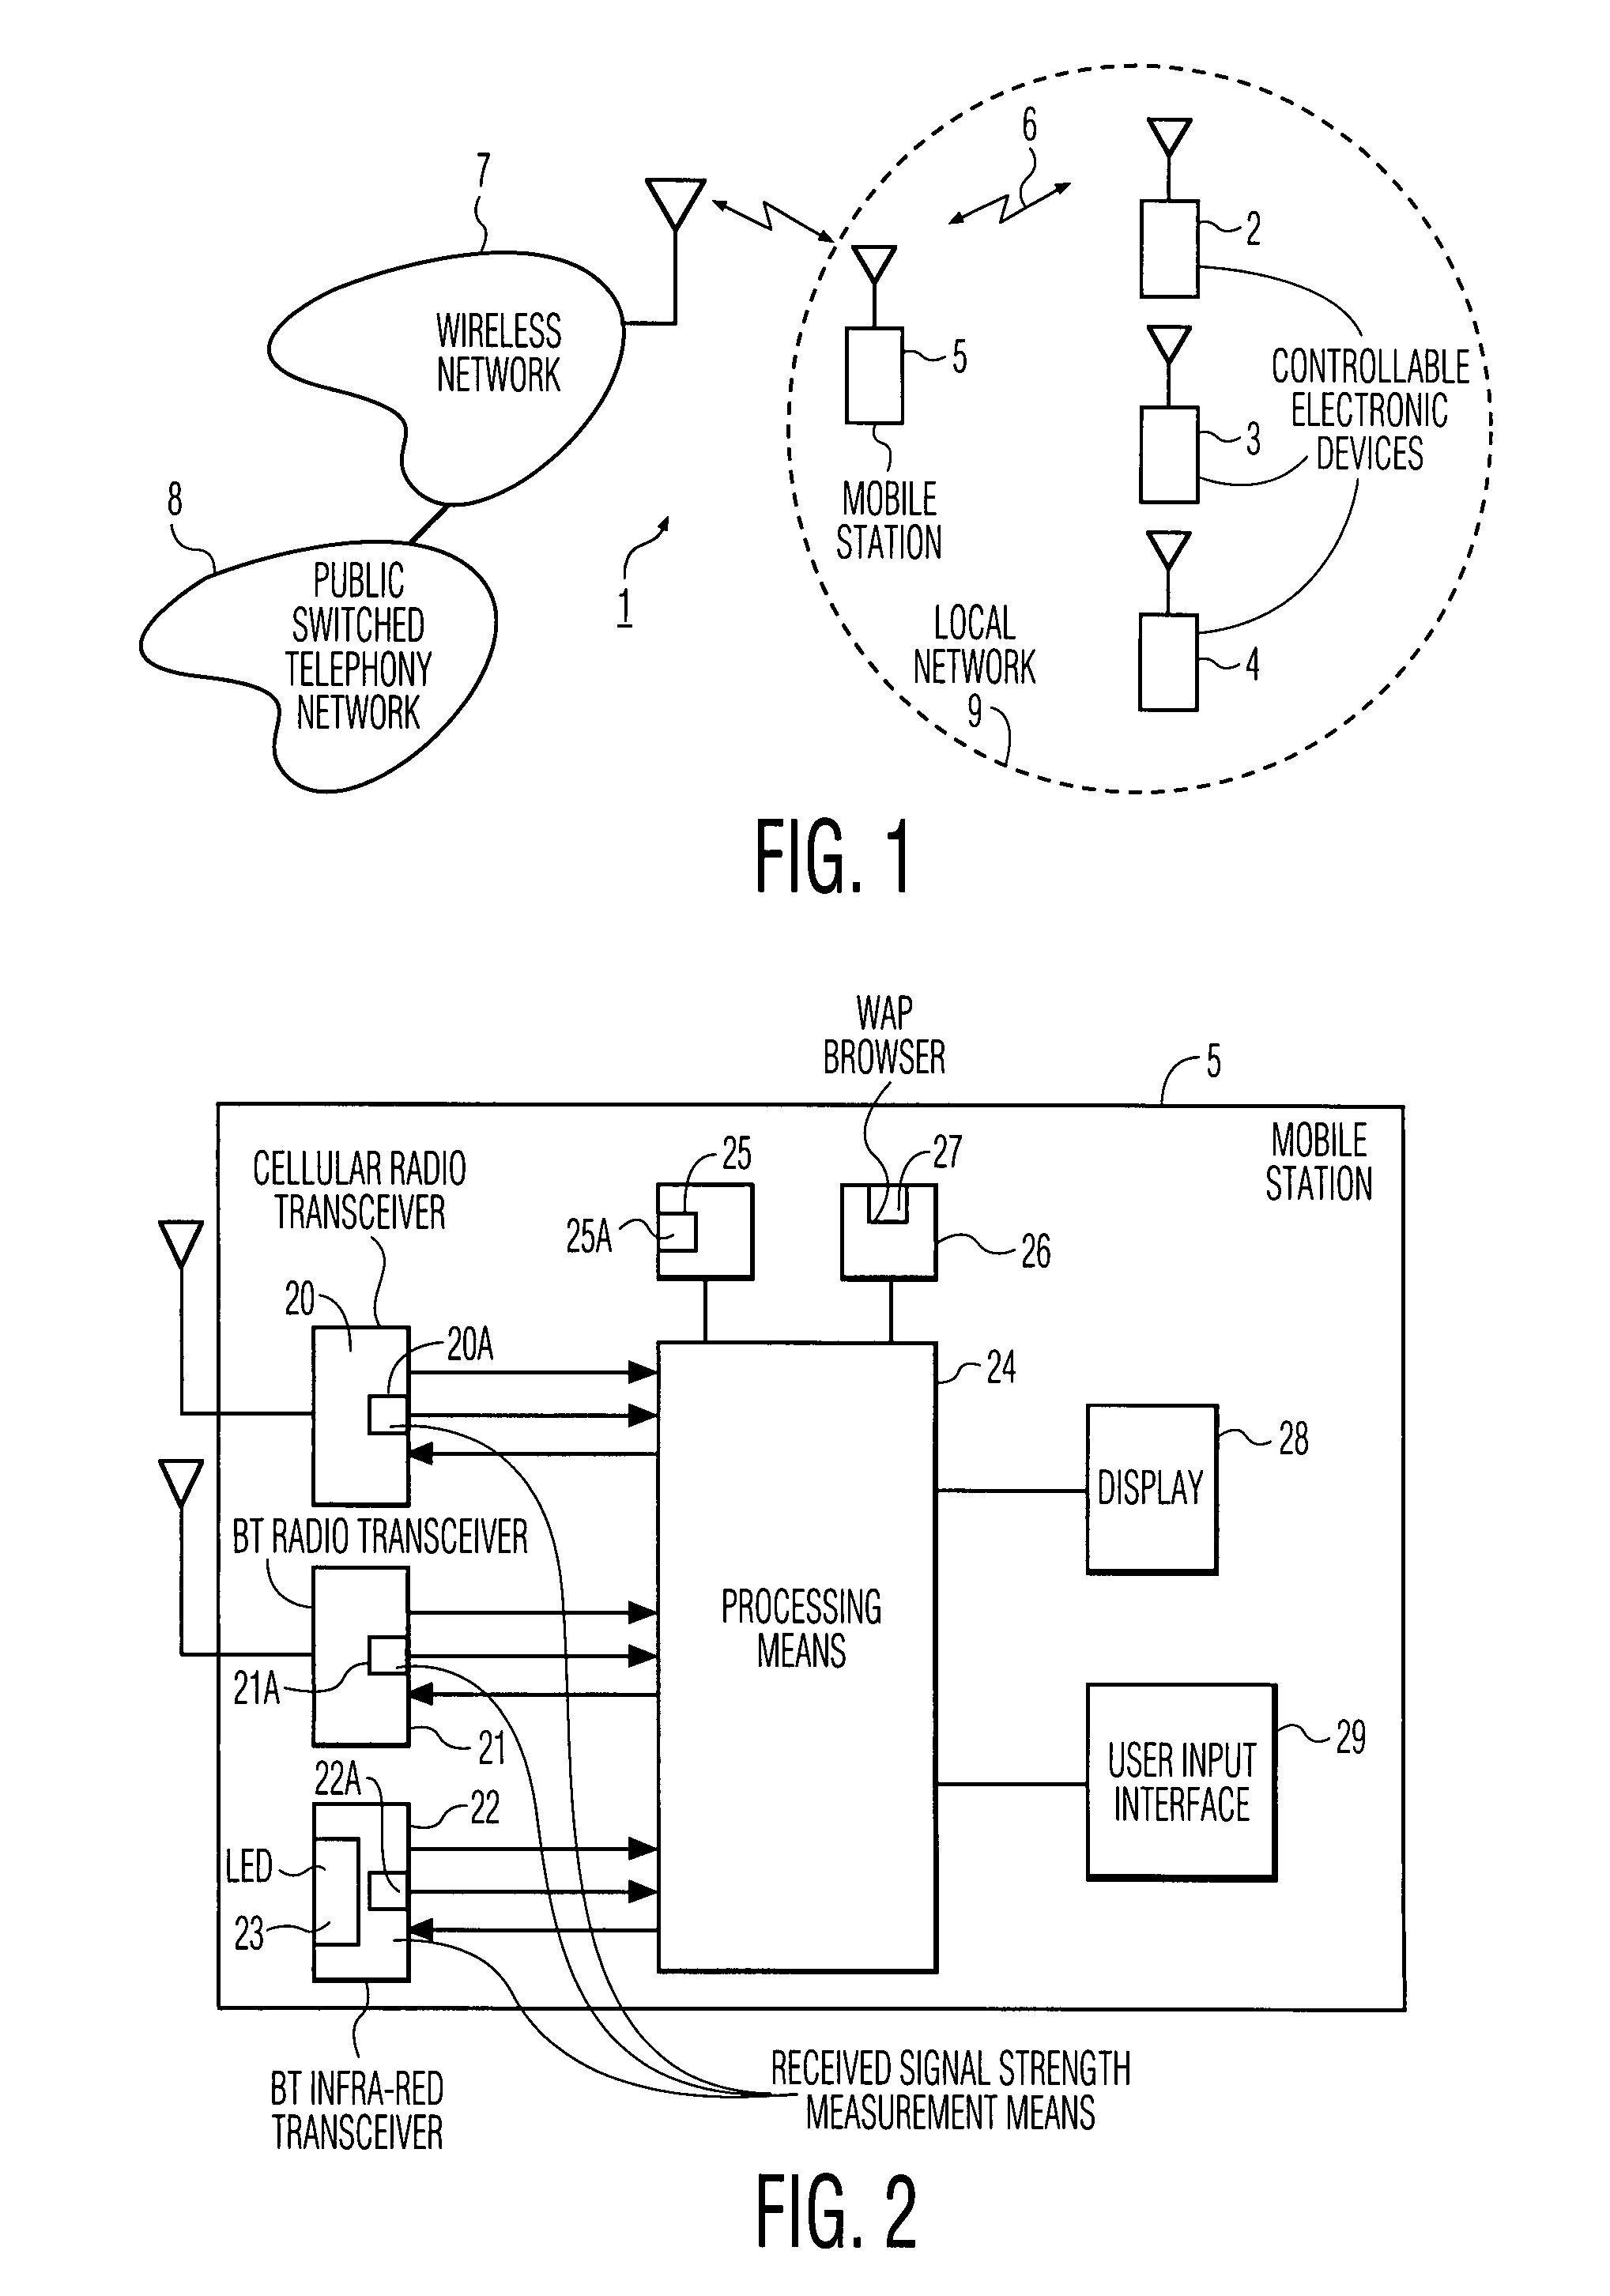 Remote control of an electronic device through downloading of a control interface of the electronic device in a mobile station